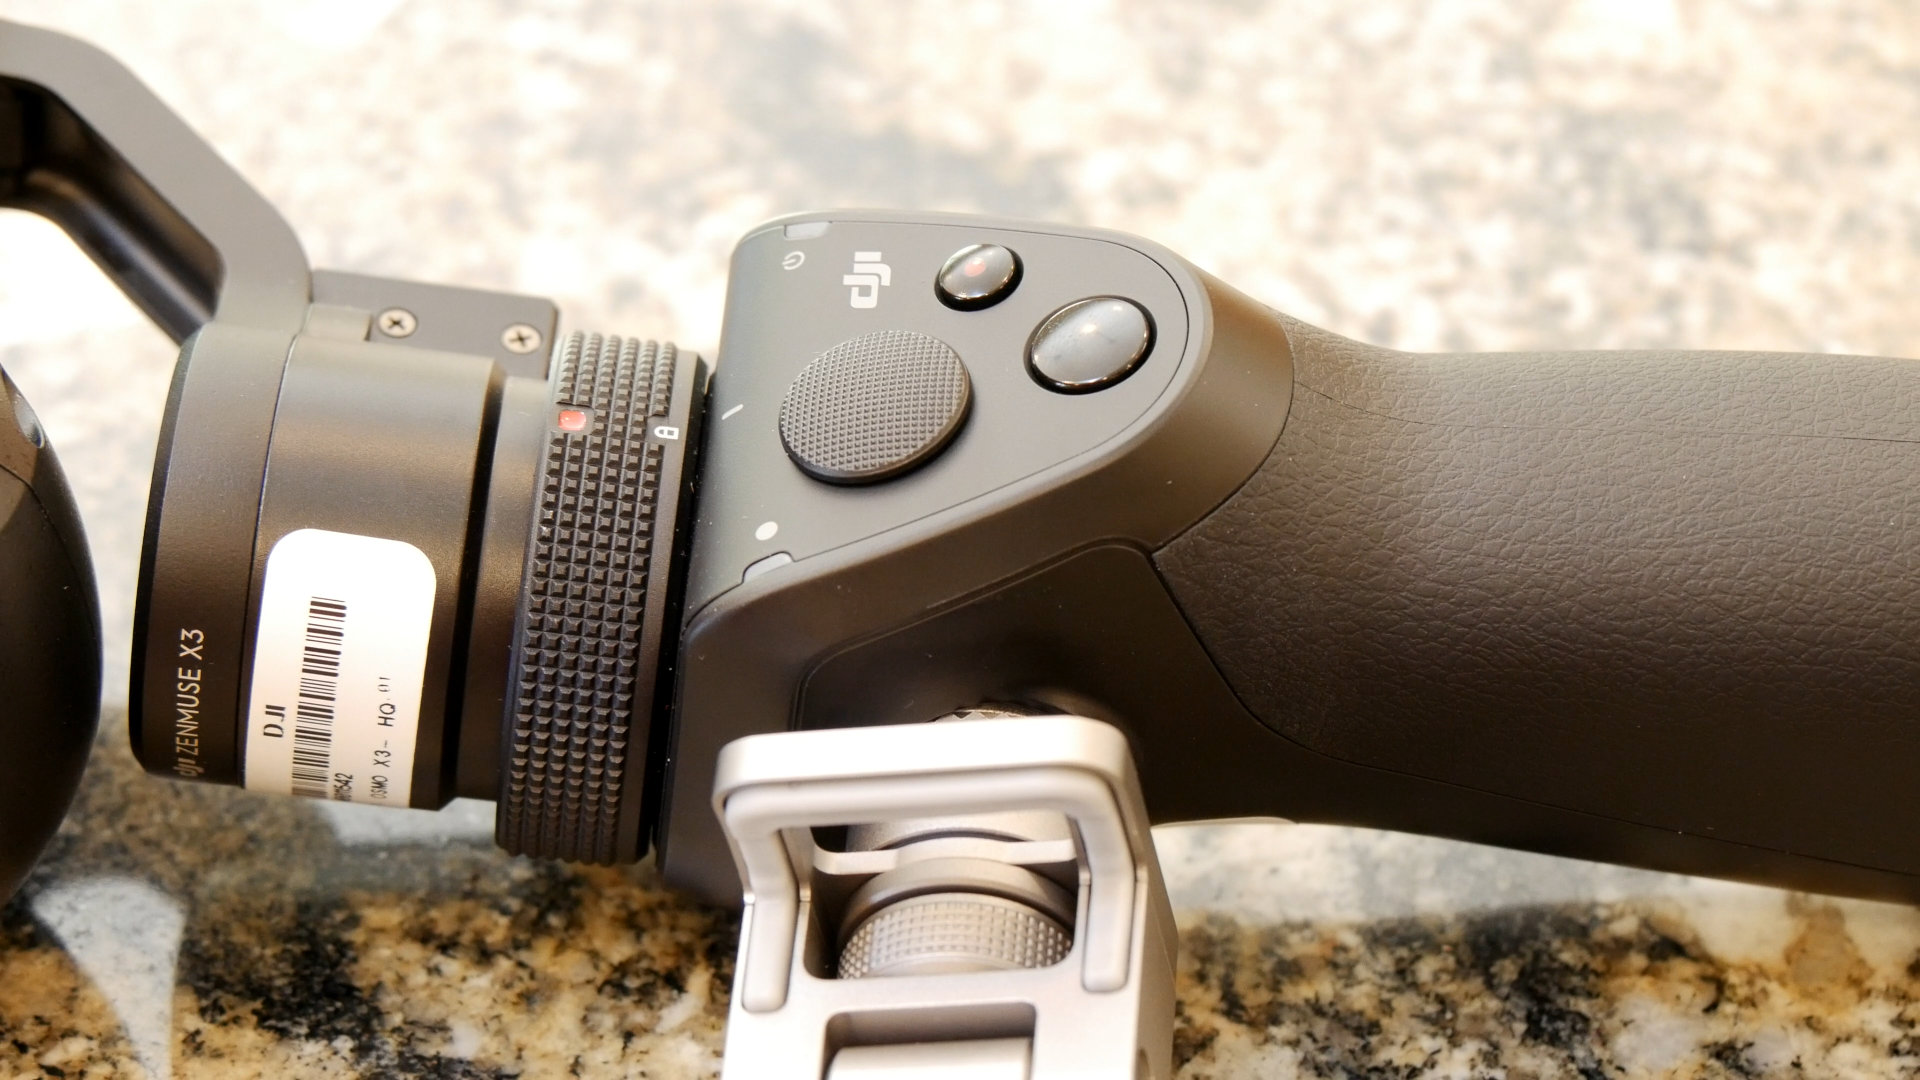 dji osmo video review osmo03